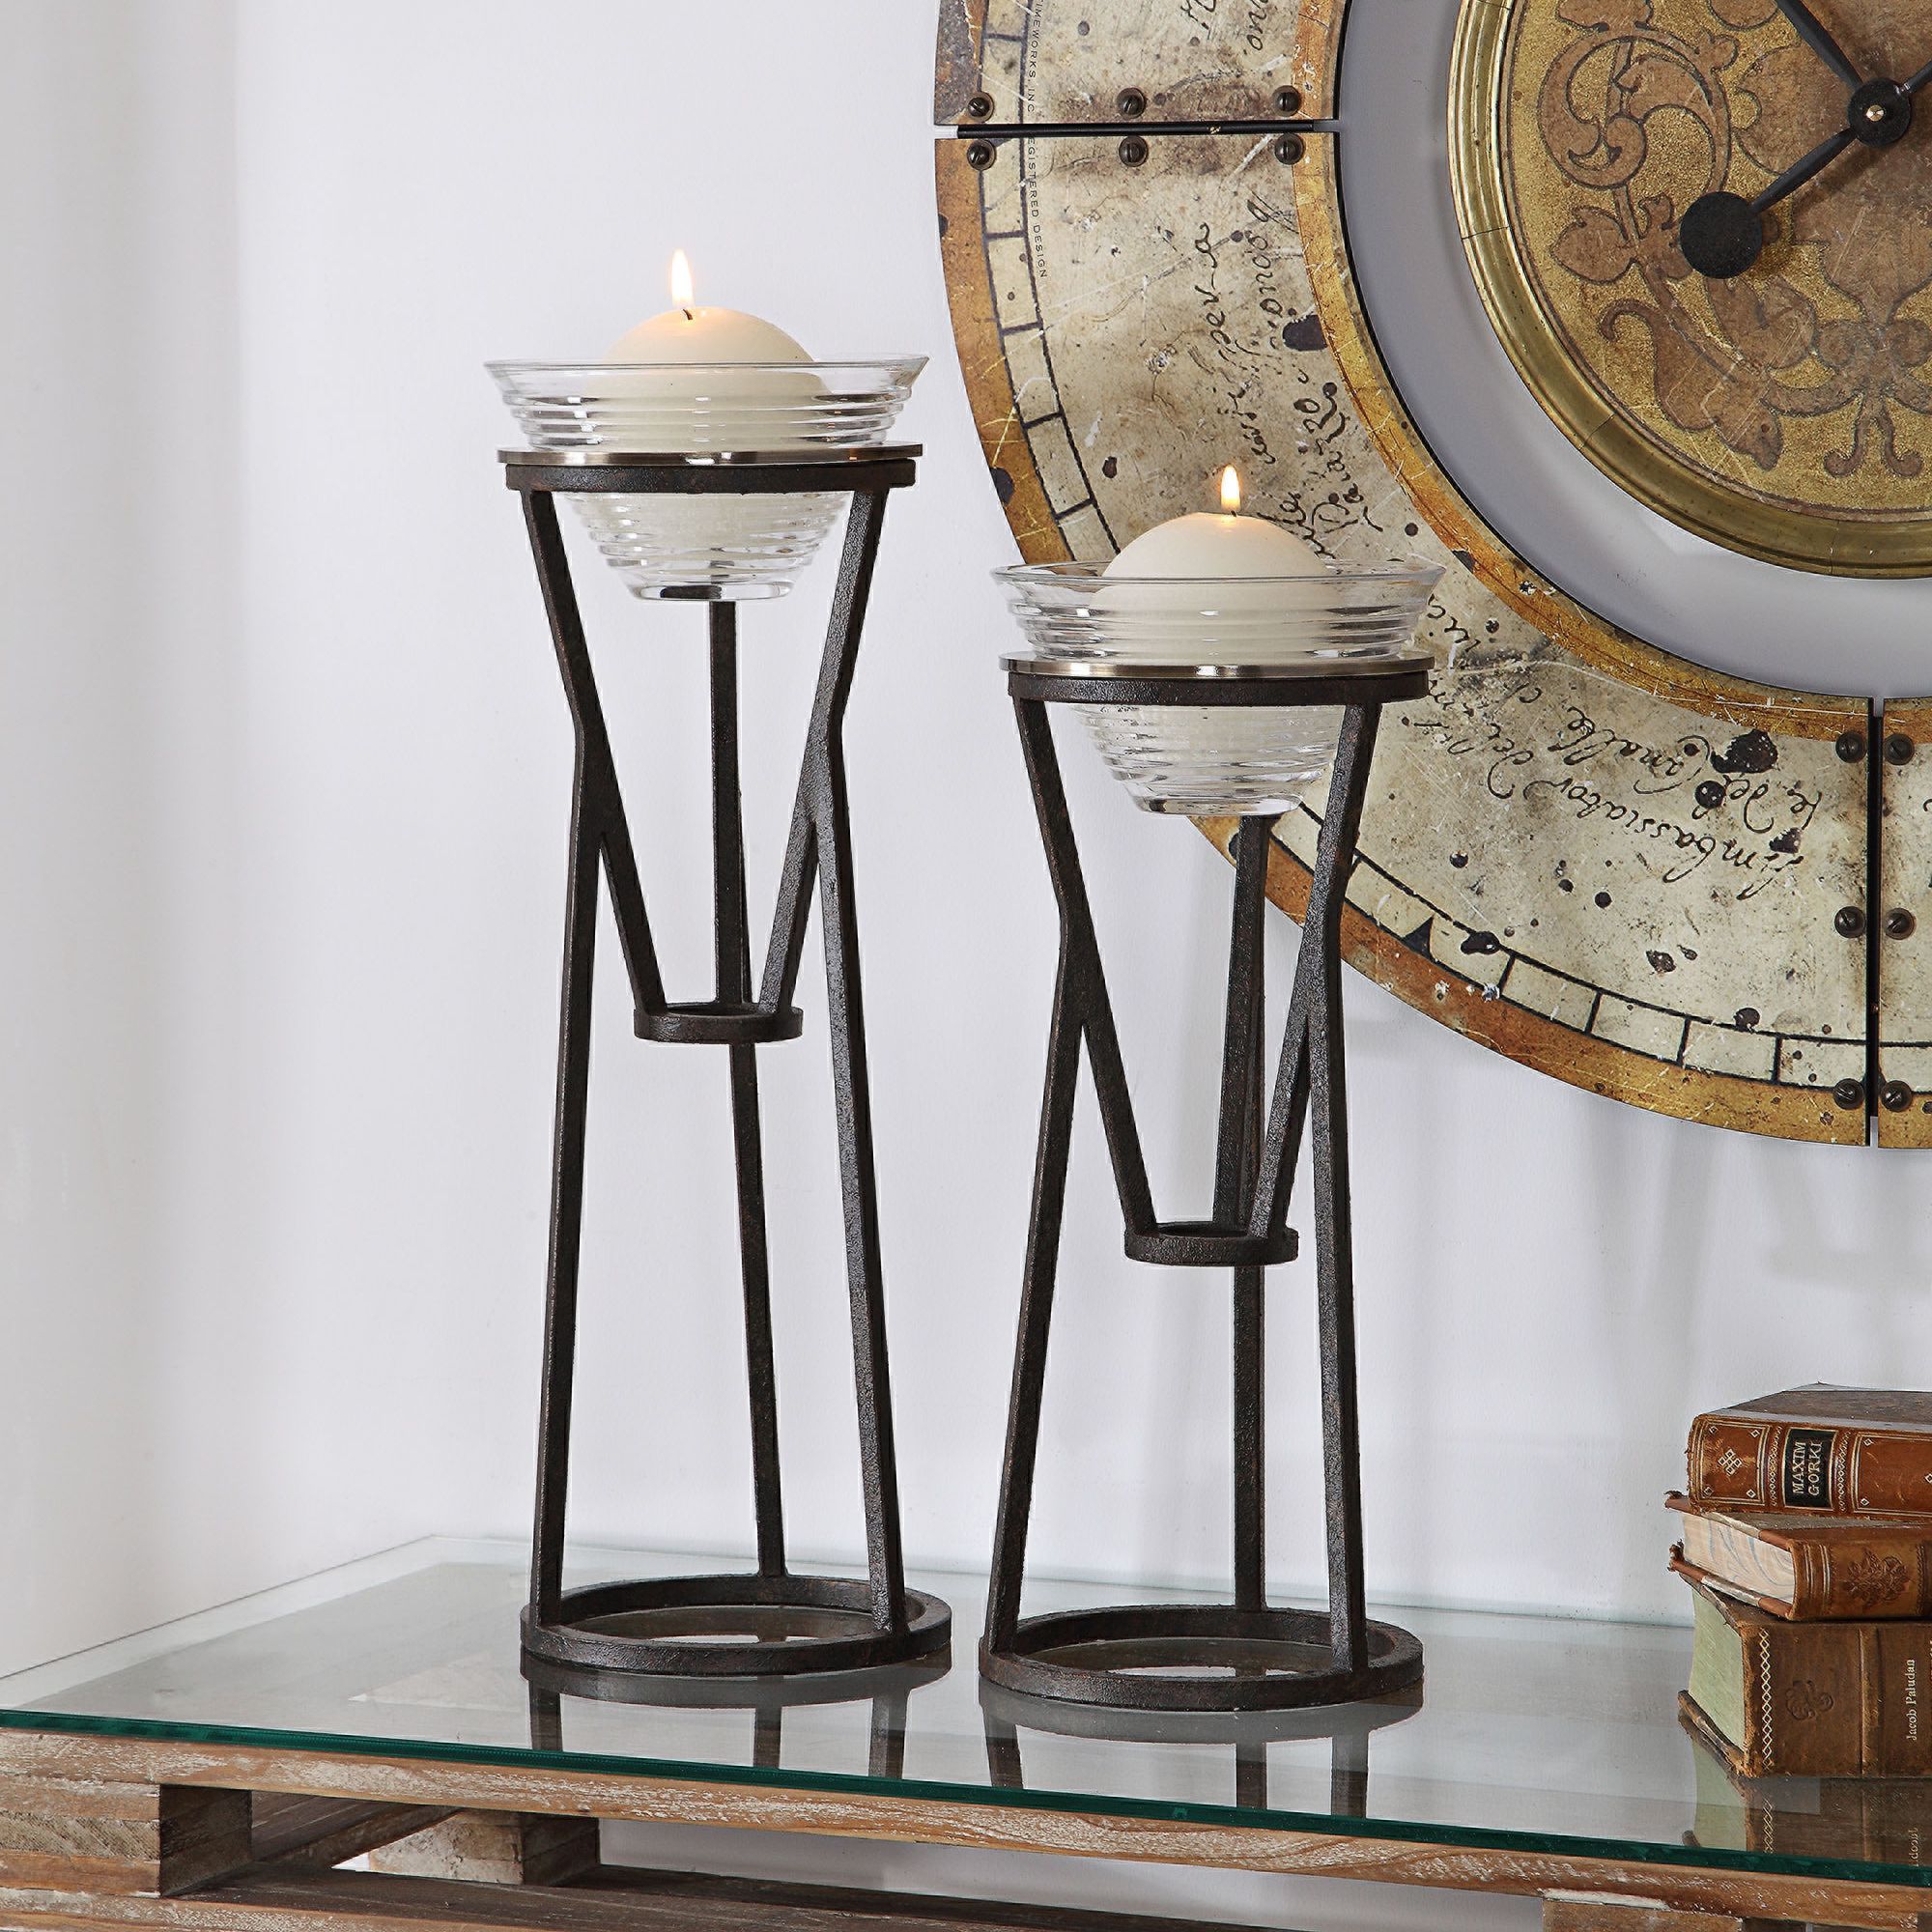 bronze candle holders